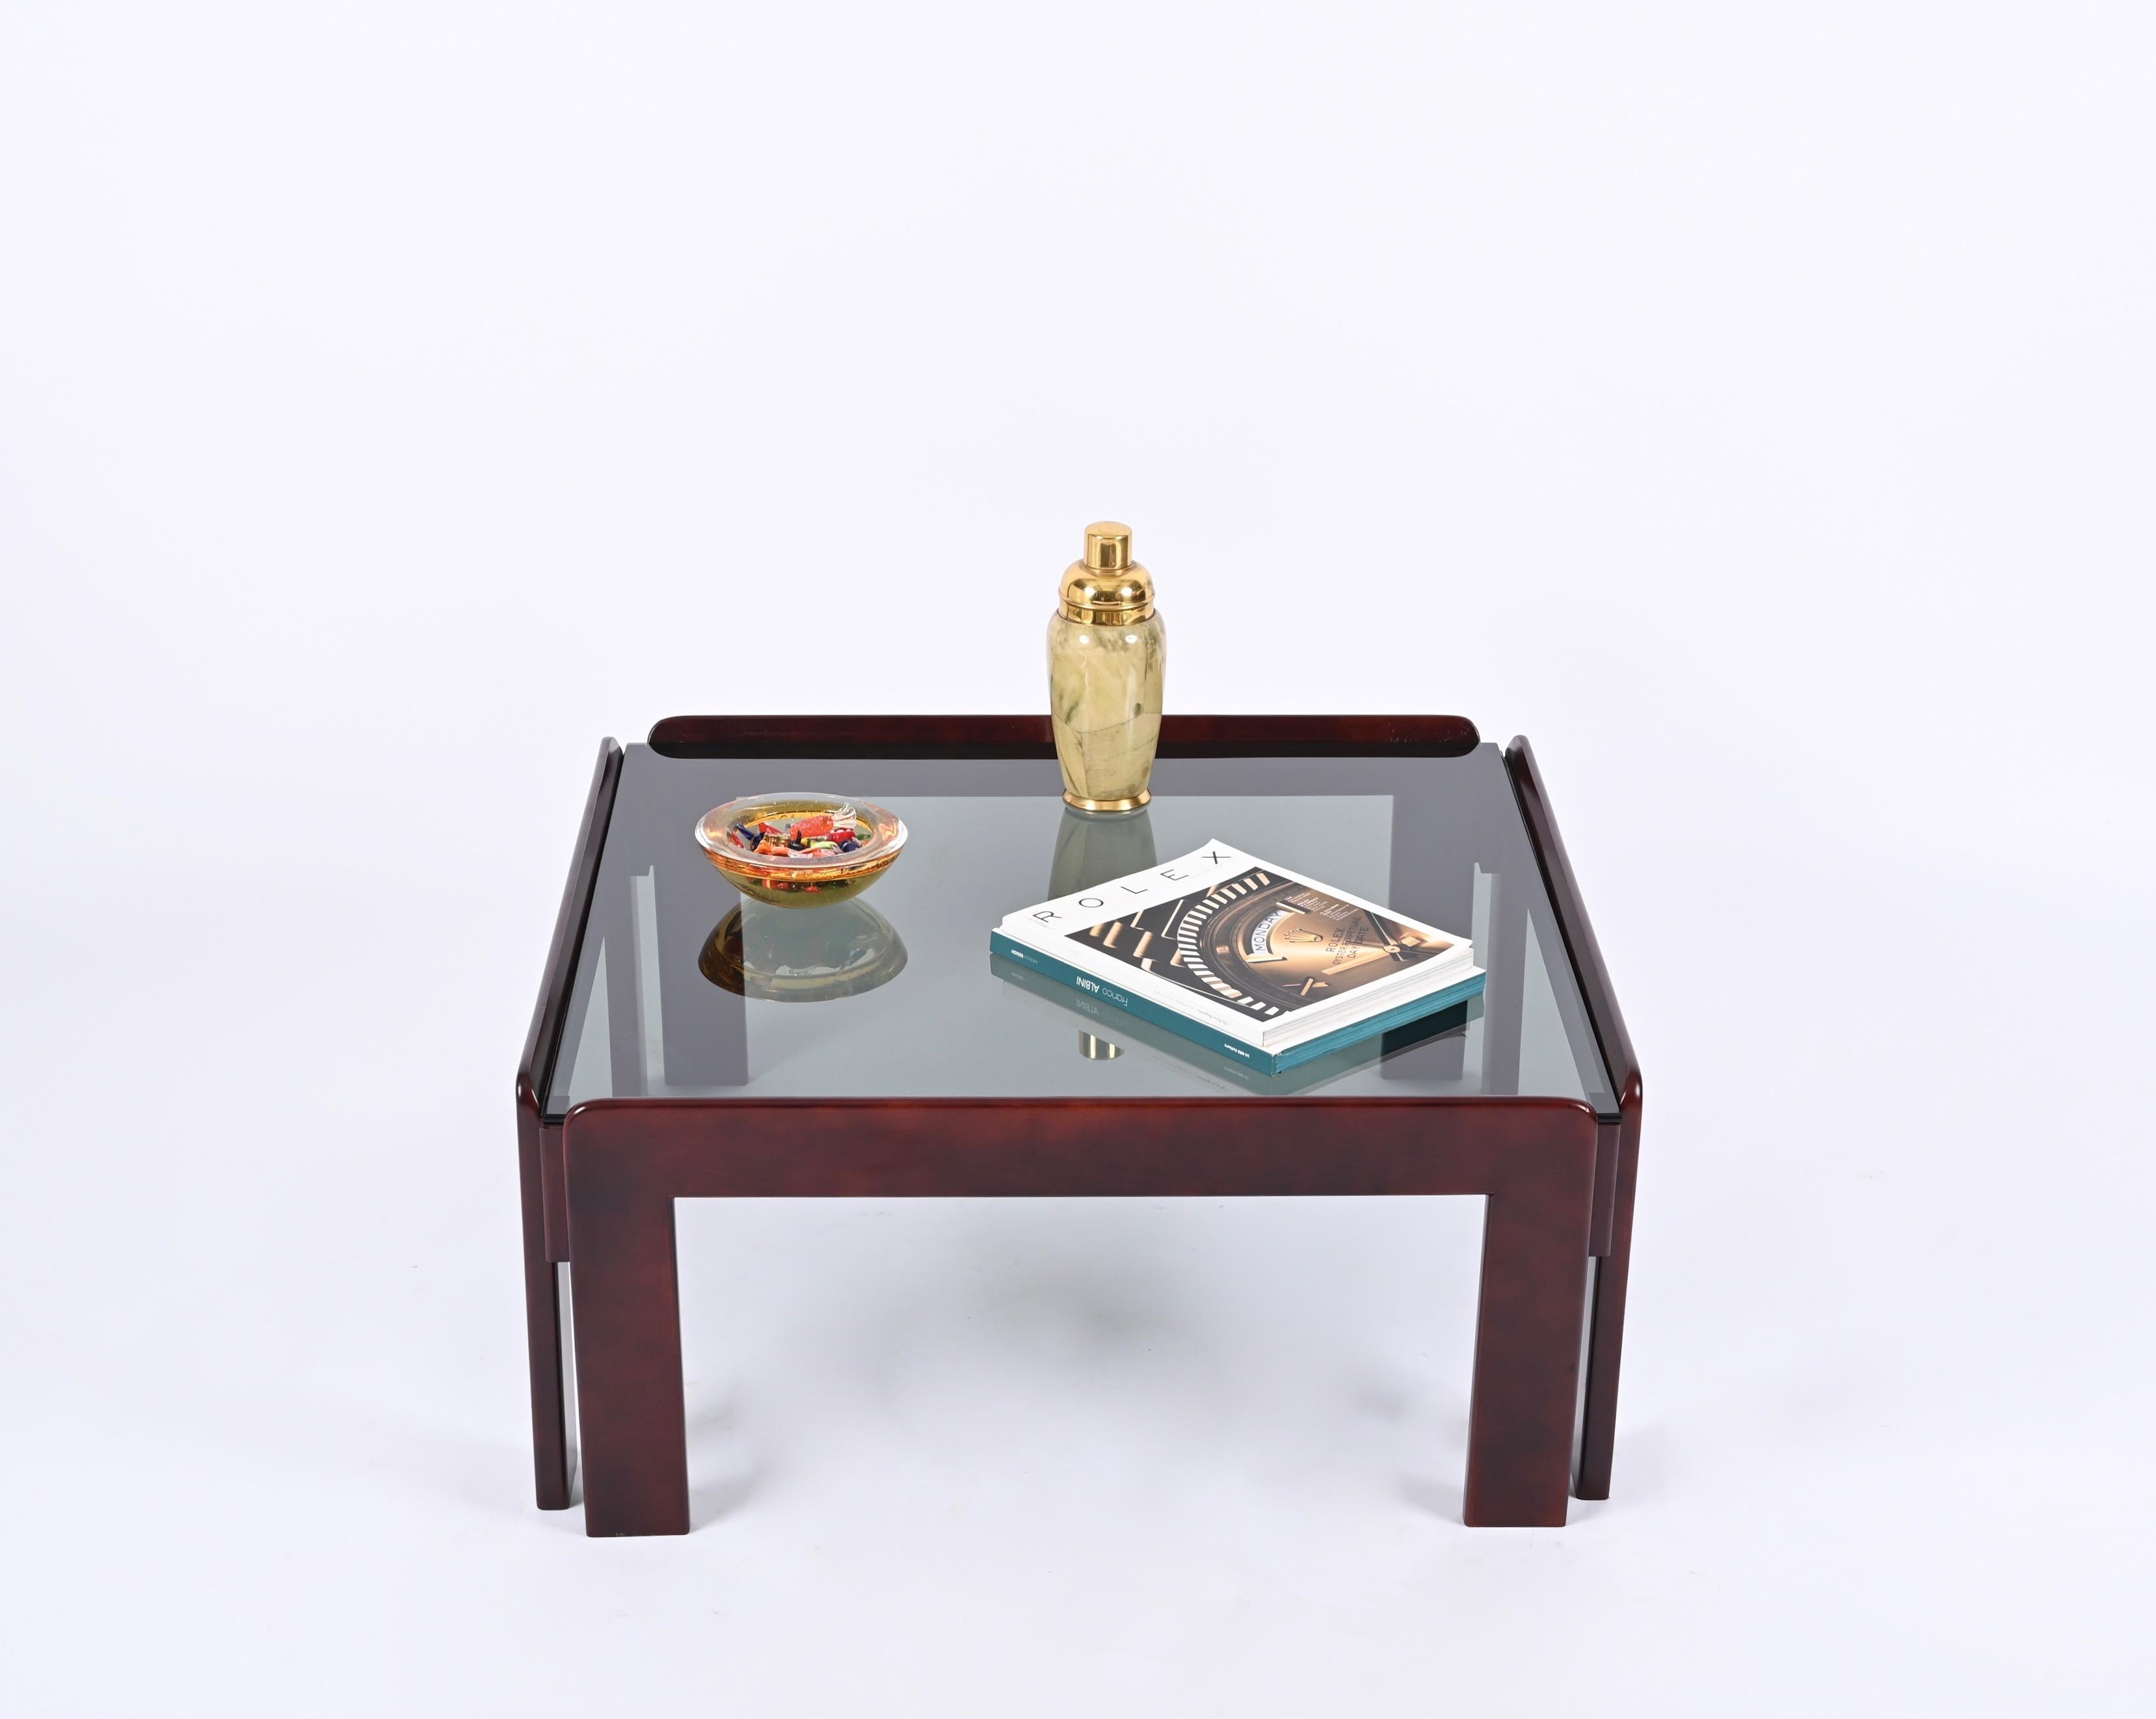 Gorgeous mid-century square coffee table in dark walnut with smoked glass top. It was produced in Italy in the 1960s by Cassina and designed by Afra & Tobia Scarpa.

You are going to love the clean lines and the presence of the dark-toned, smoked